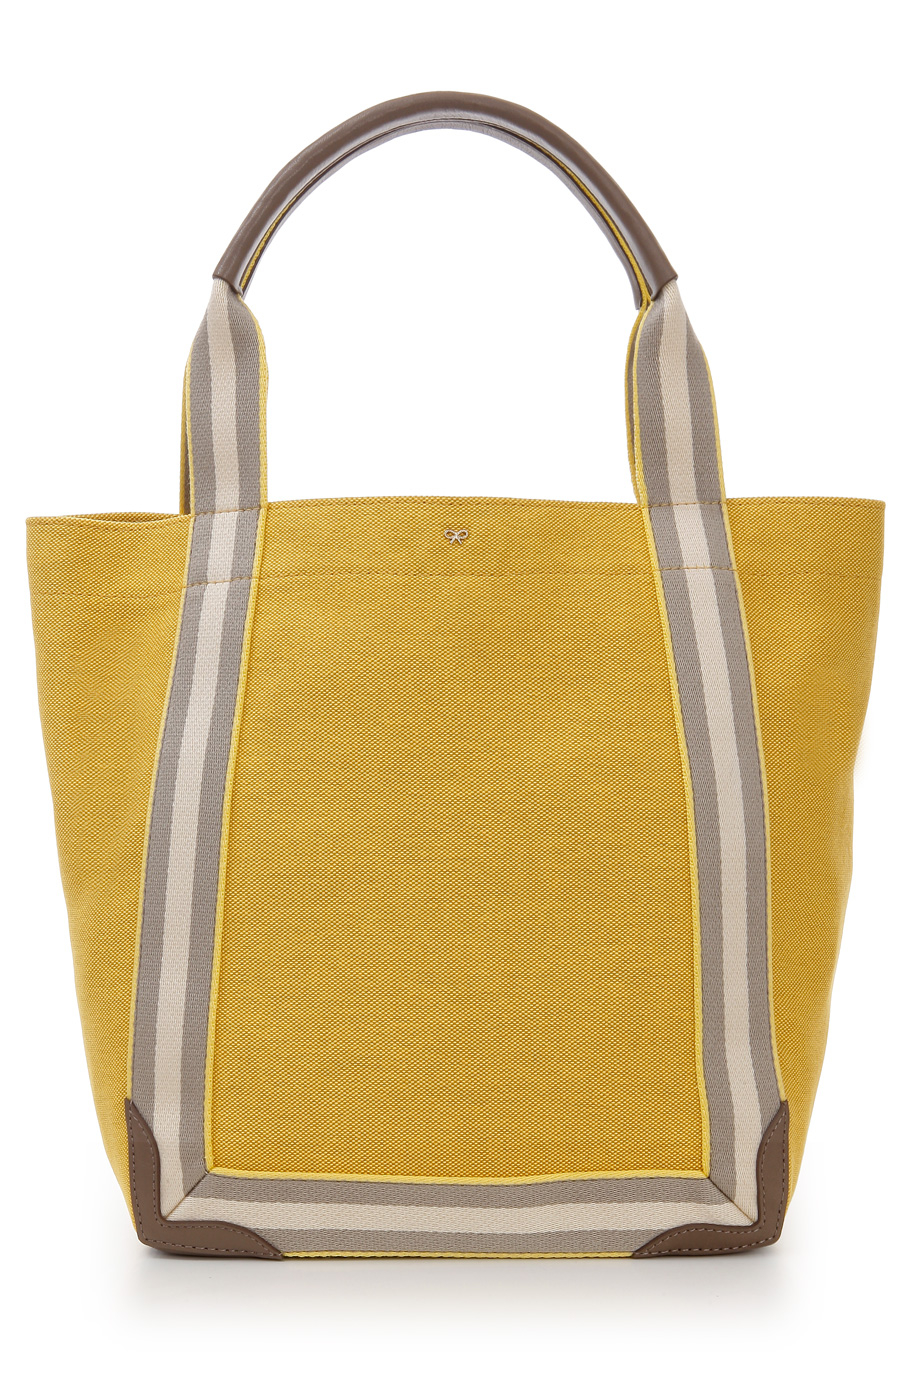 Anya Hindmarch Pont Small Canvas Tote Bag in Yellow - Lyst